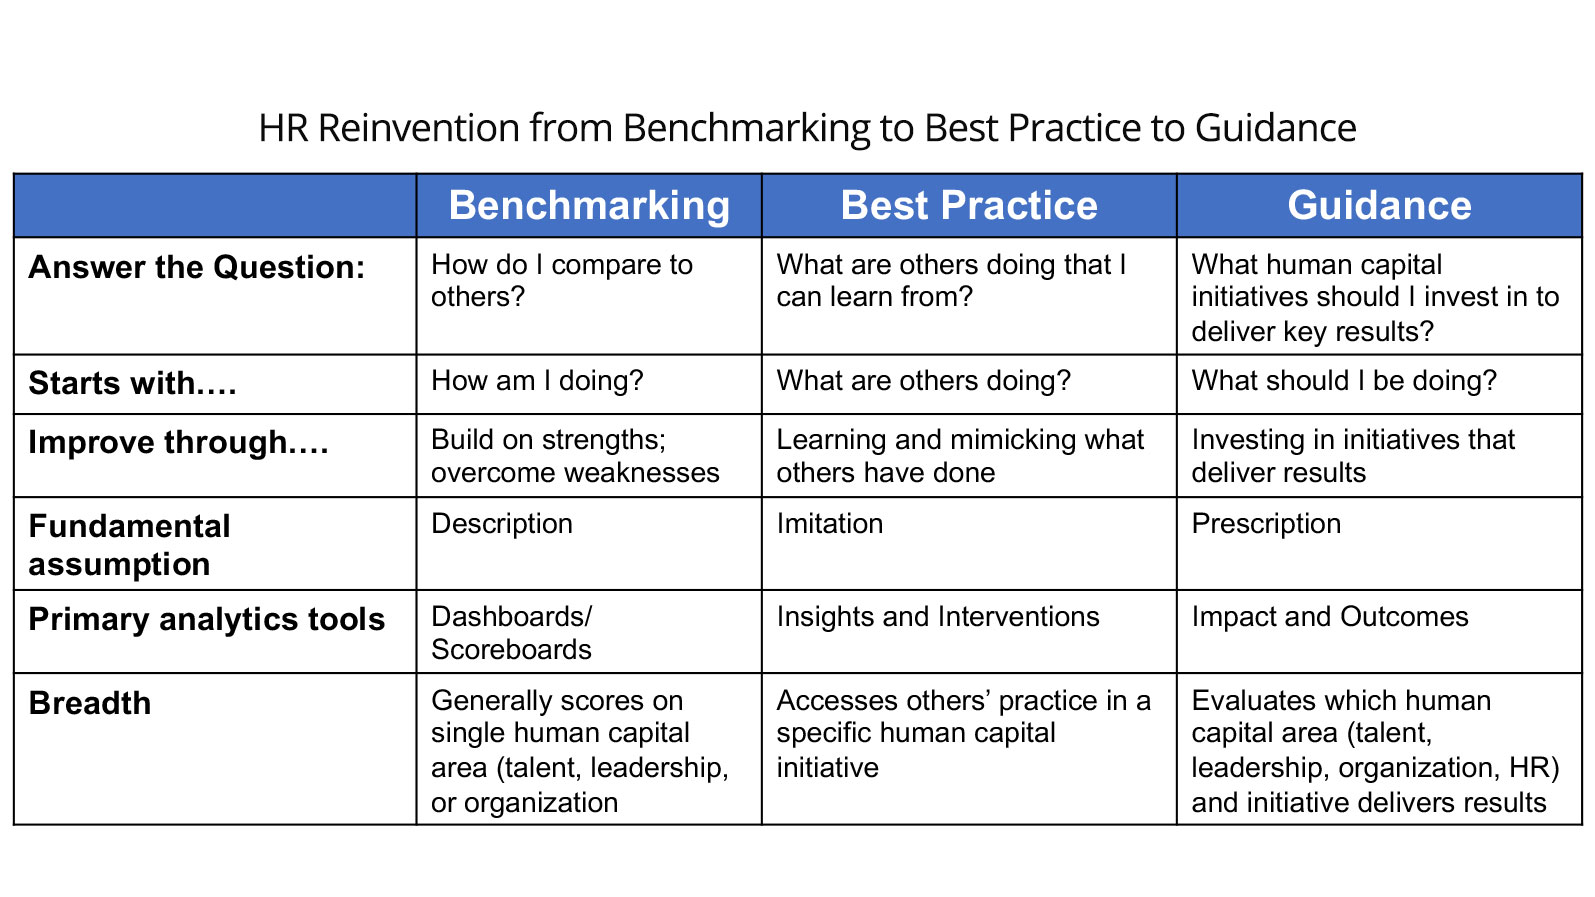 HR Reinvention from benchmarking to best practice to guidance.